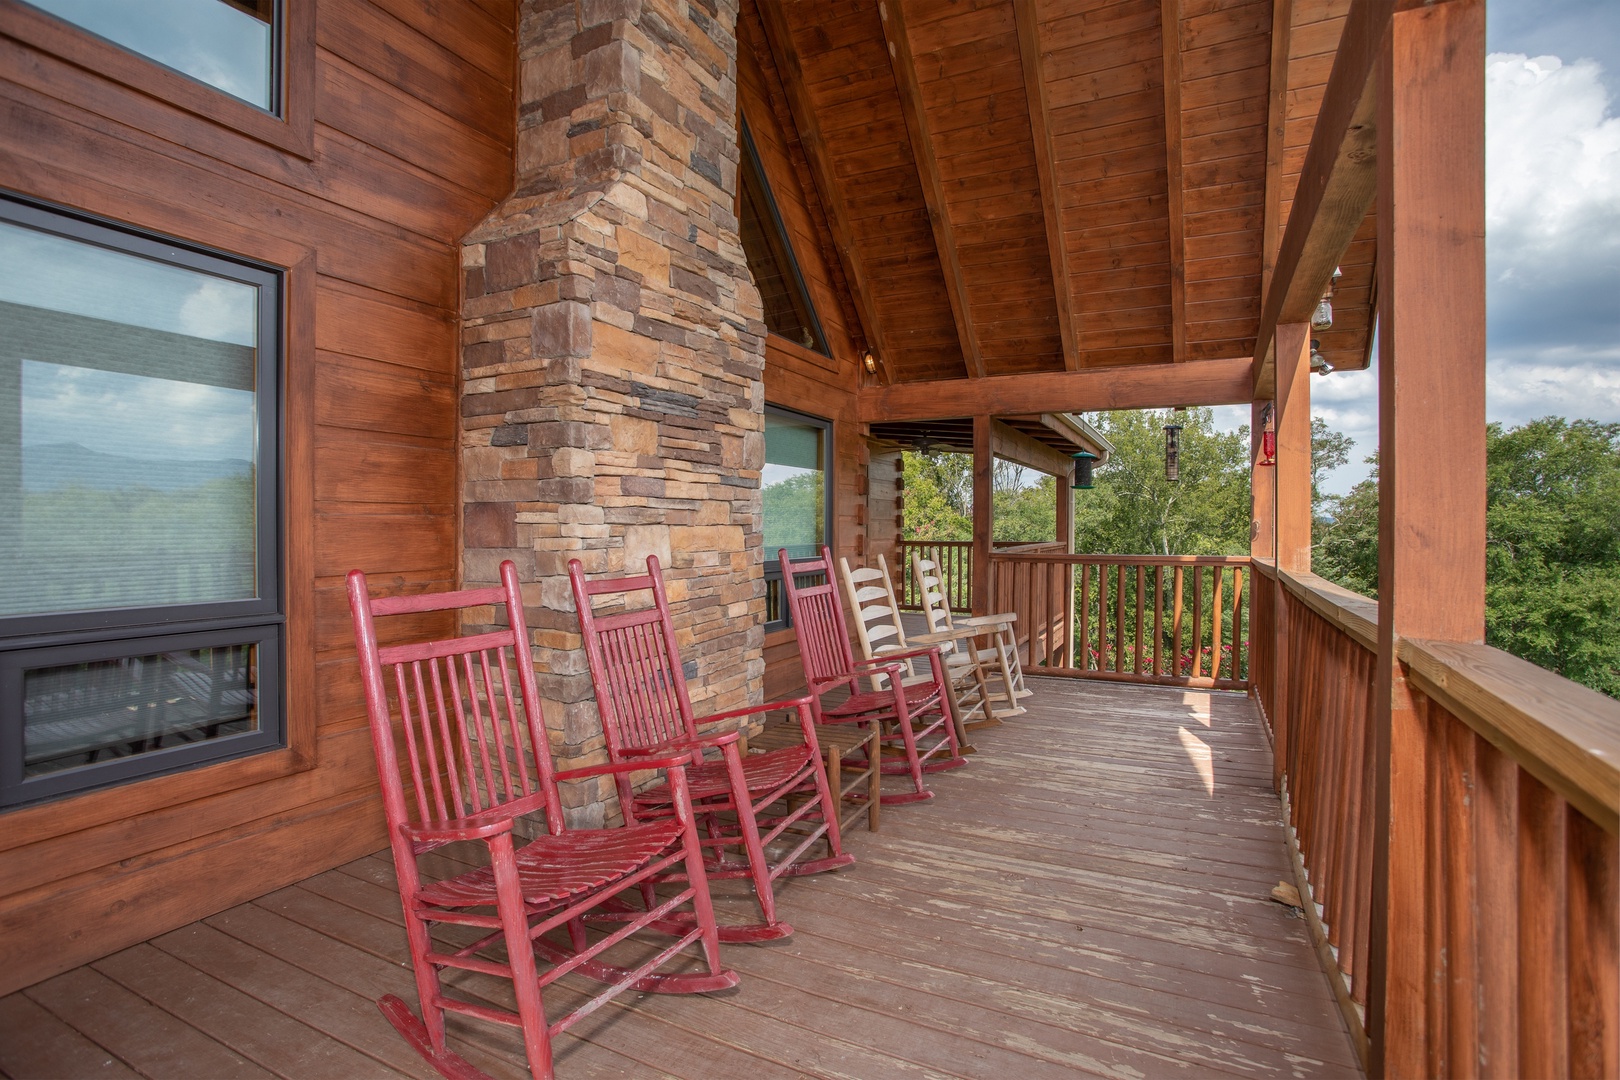 Rocking chairs on a covered deck at Cedar Creeks, a 2-bedroom cabin rental located near Douglas Lake